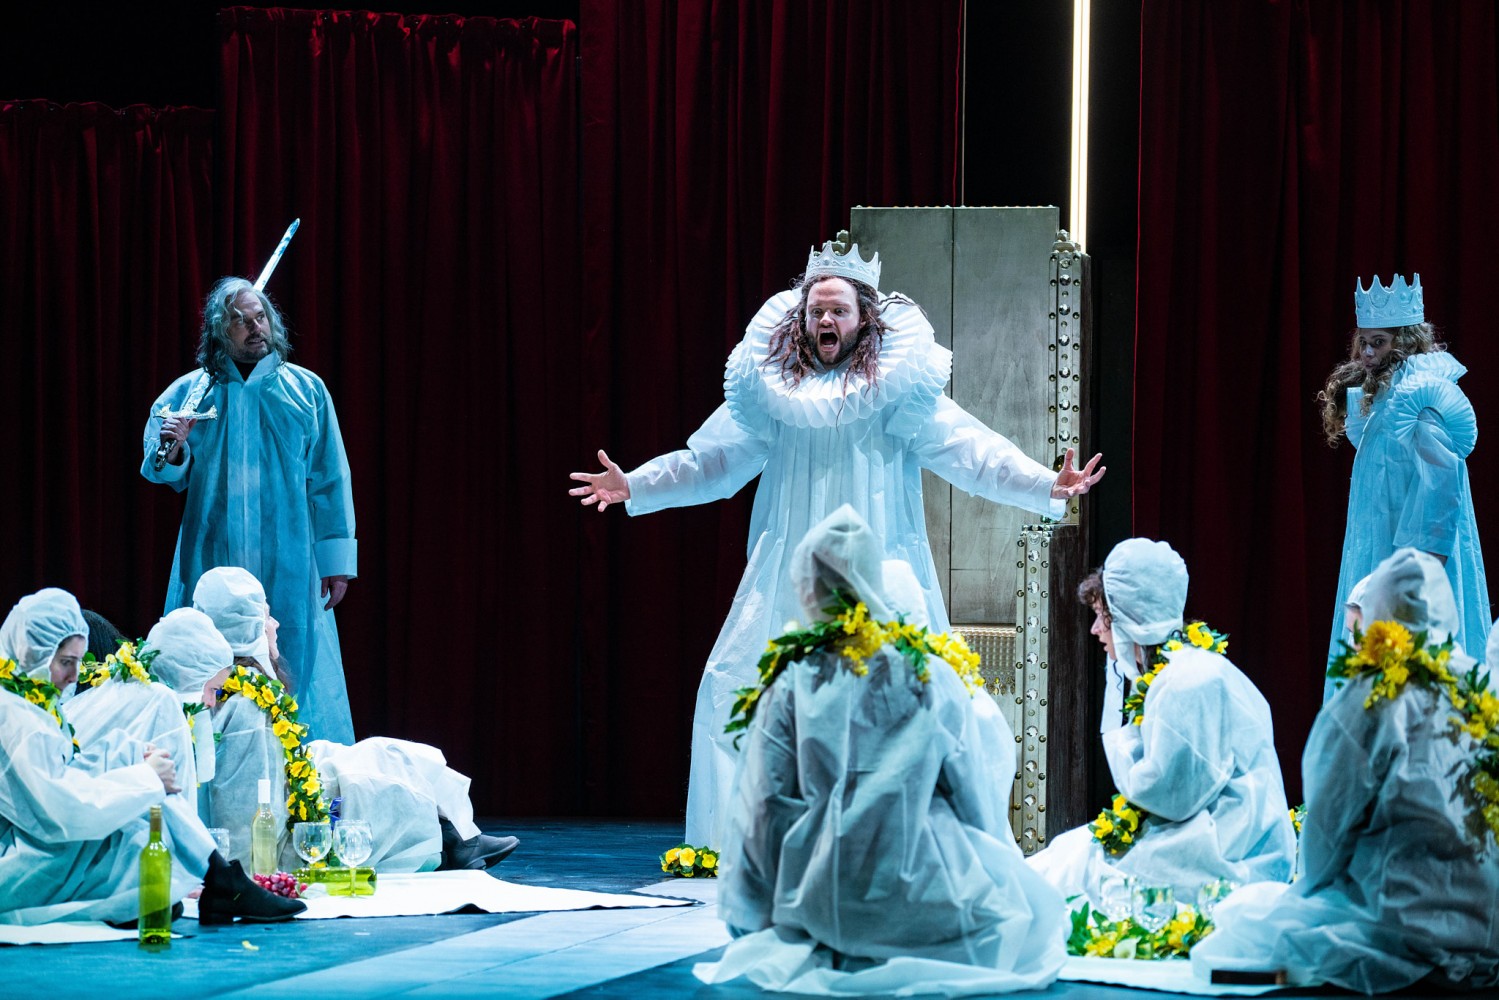 "OPERA2DAY, ONCE AGAIN, HAS CONTRIVED A BRILLIANT NEW OPERA"